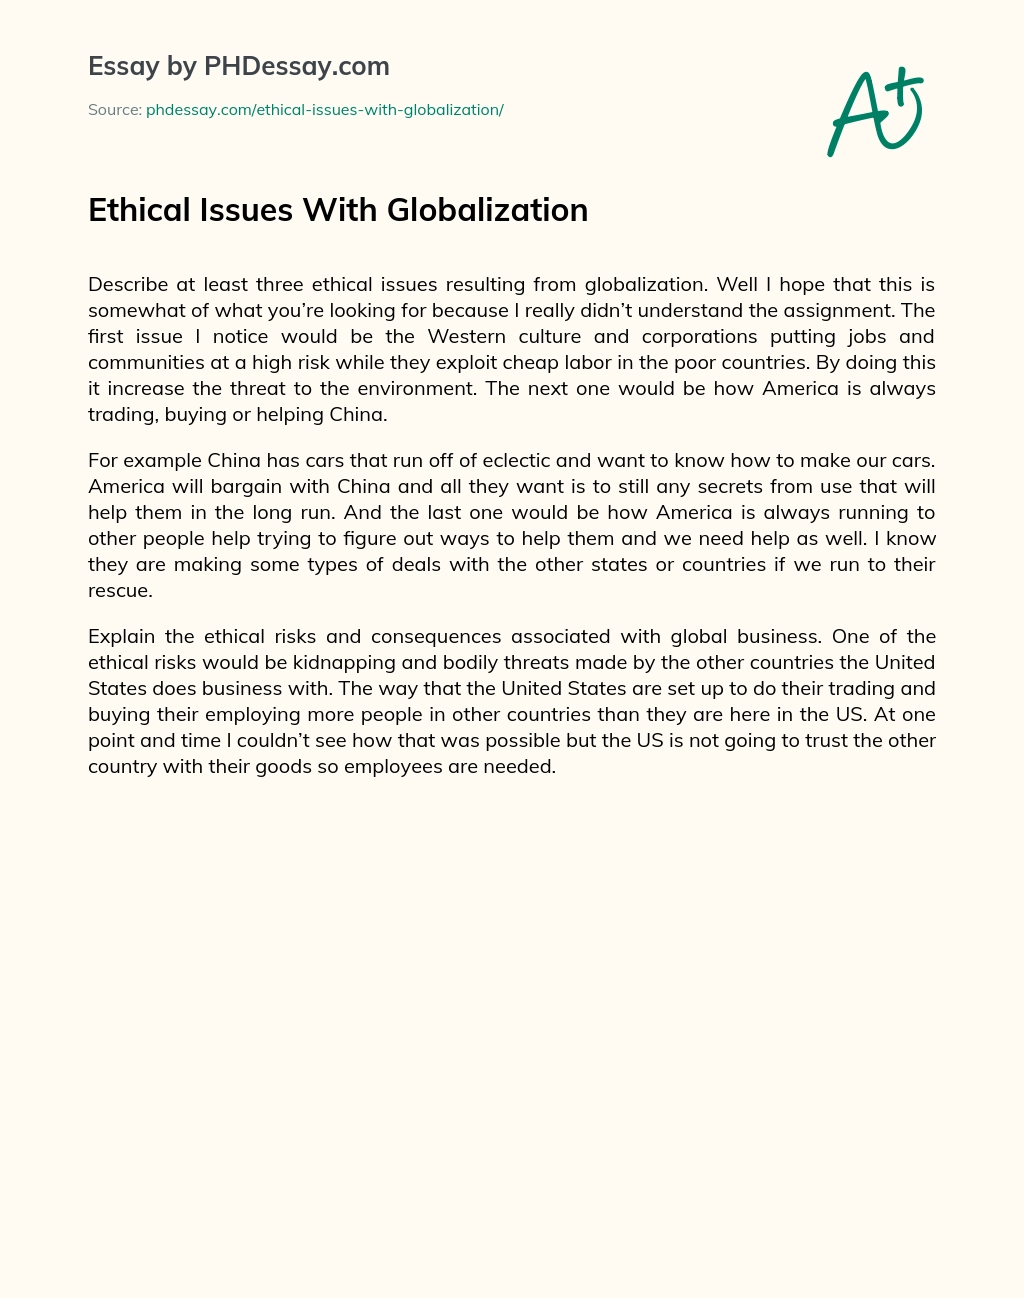 Ethical Issues With Globalization essay